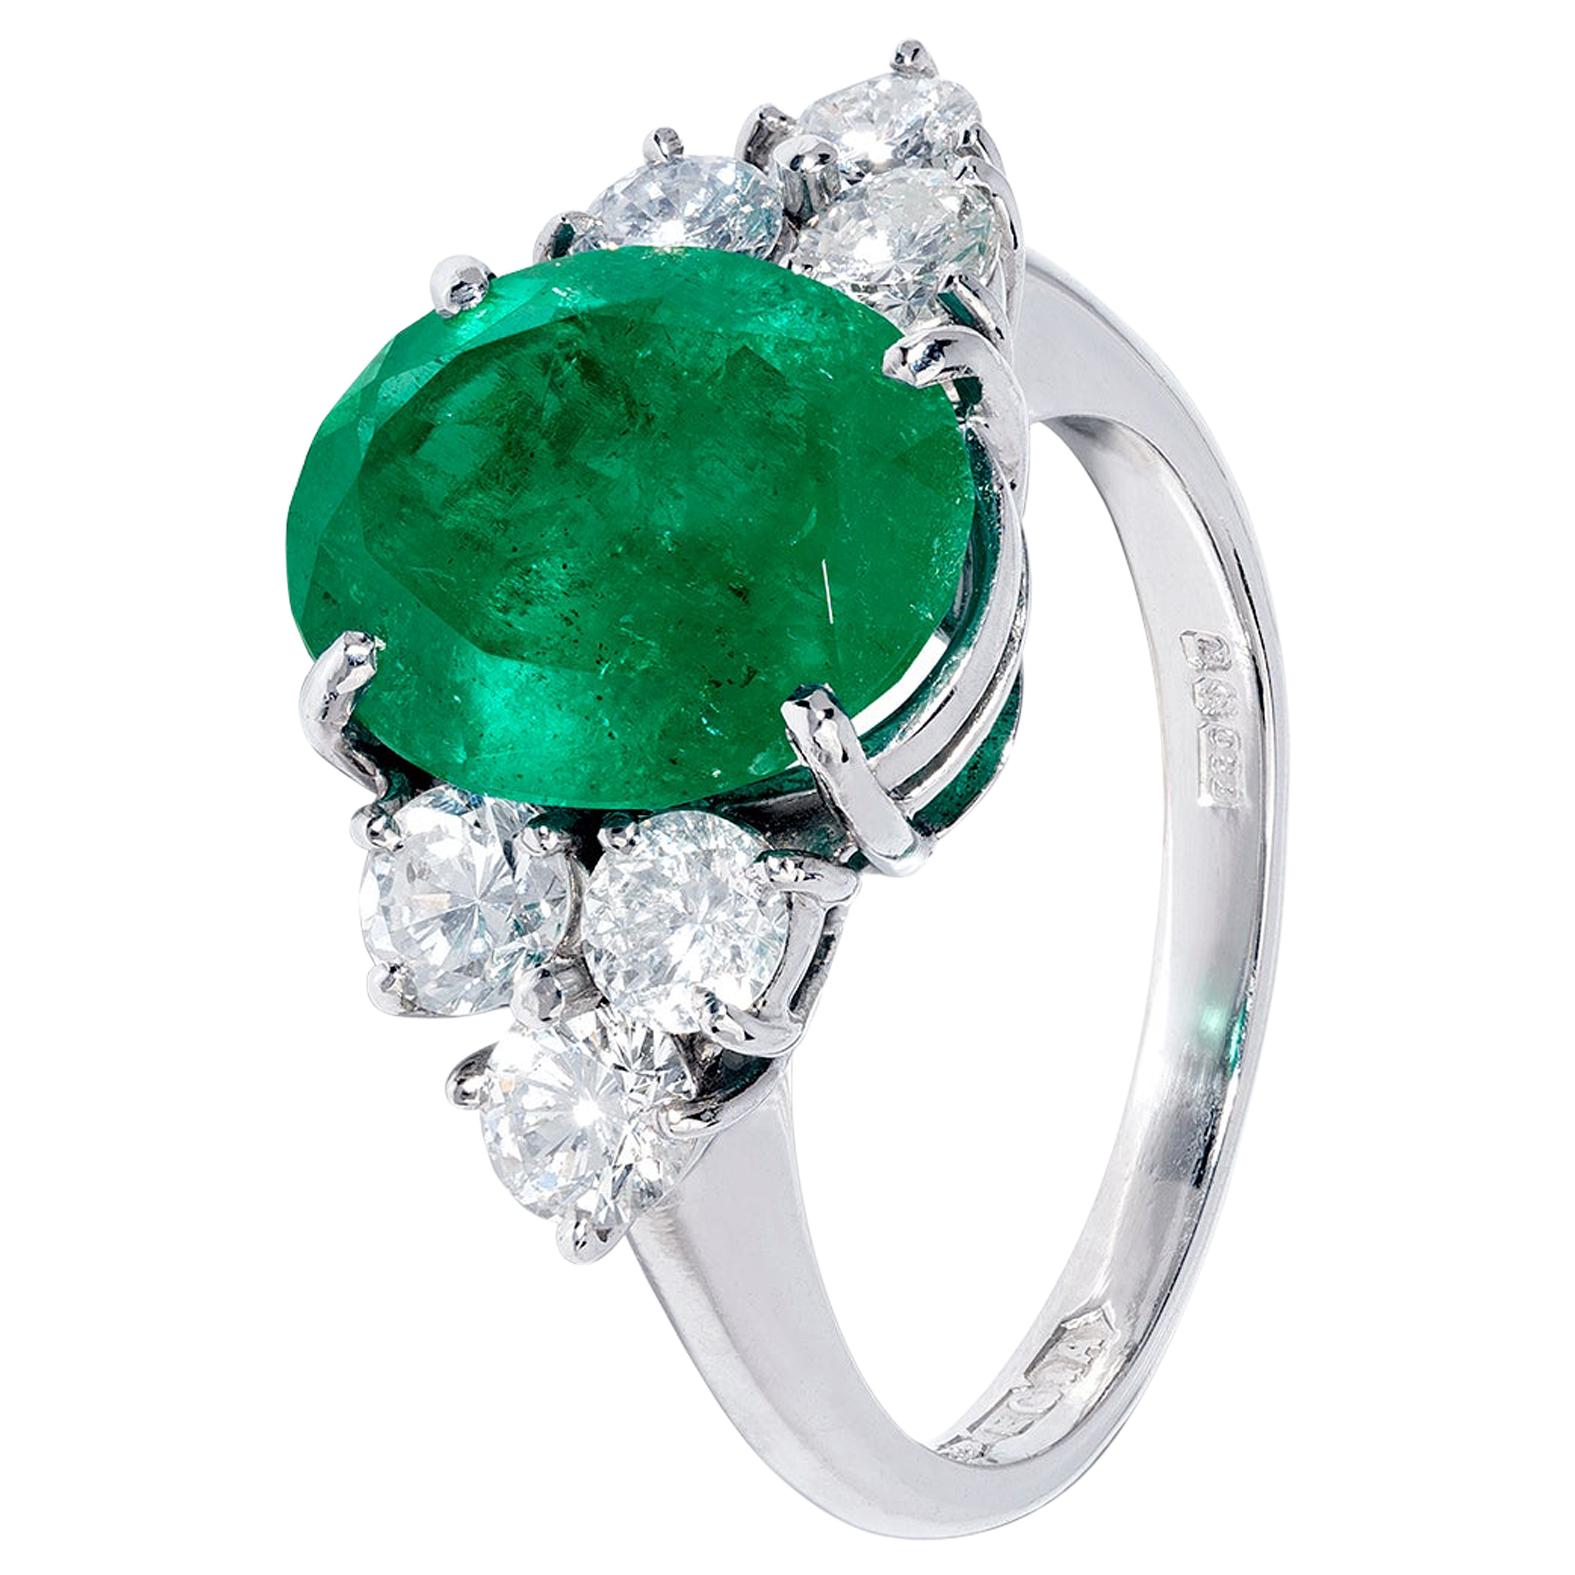 2.87 Carats Emerald Ring with Diamonds in White Gold For Sale